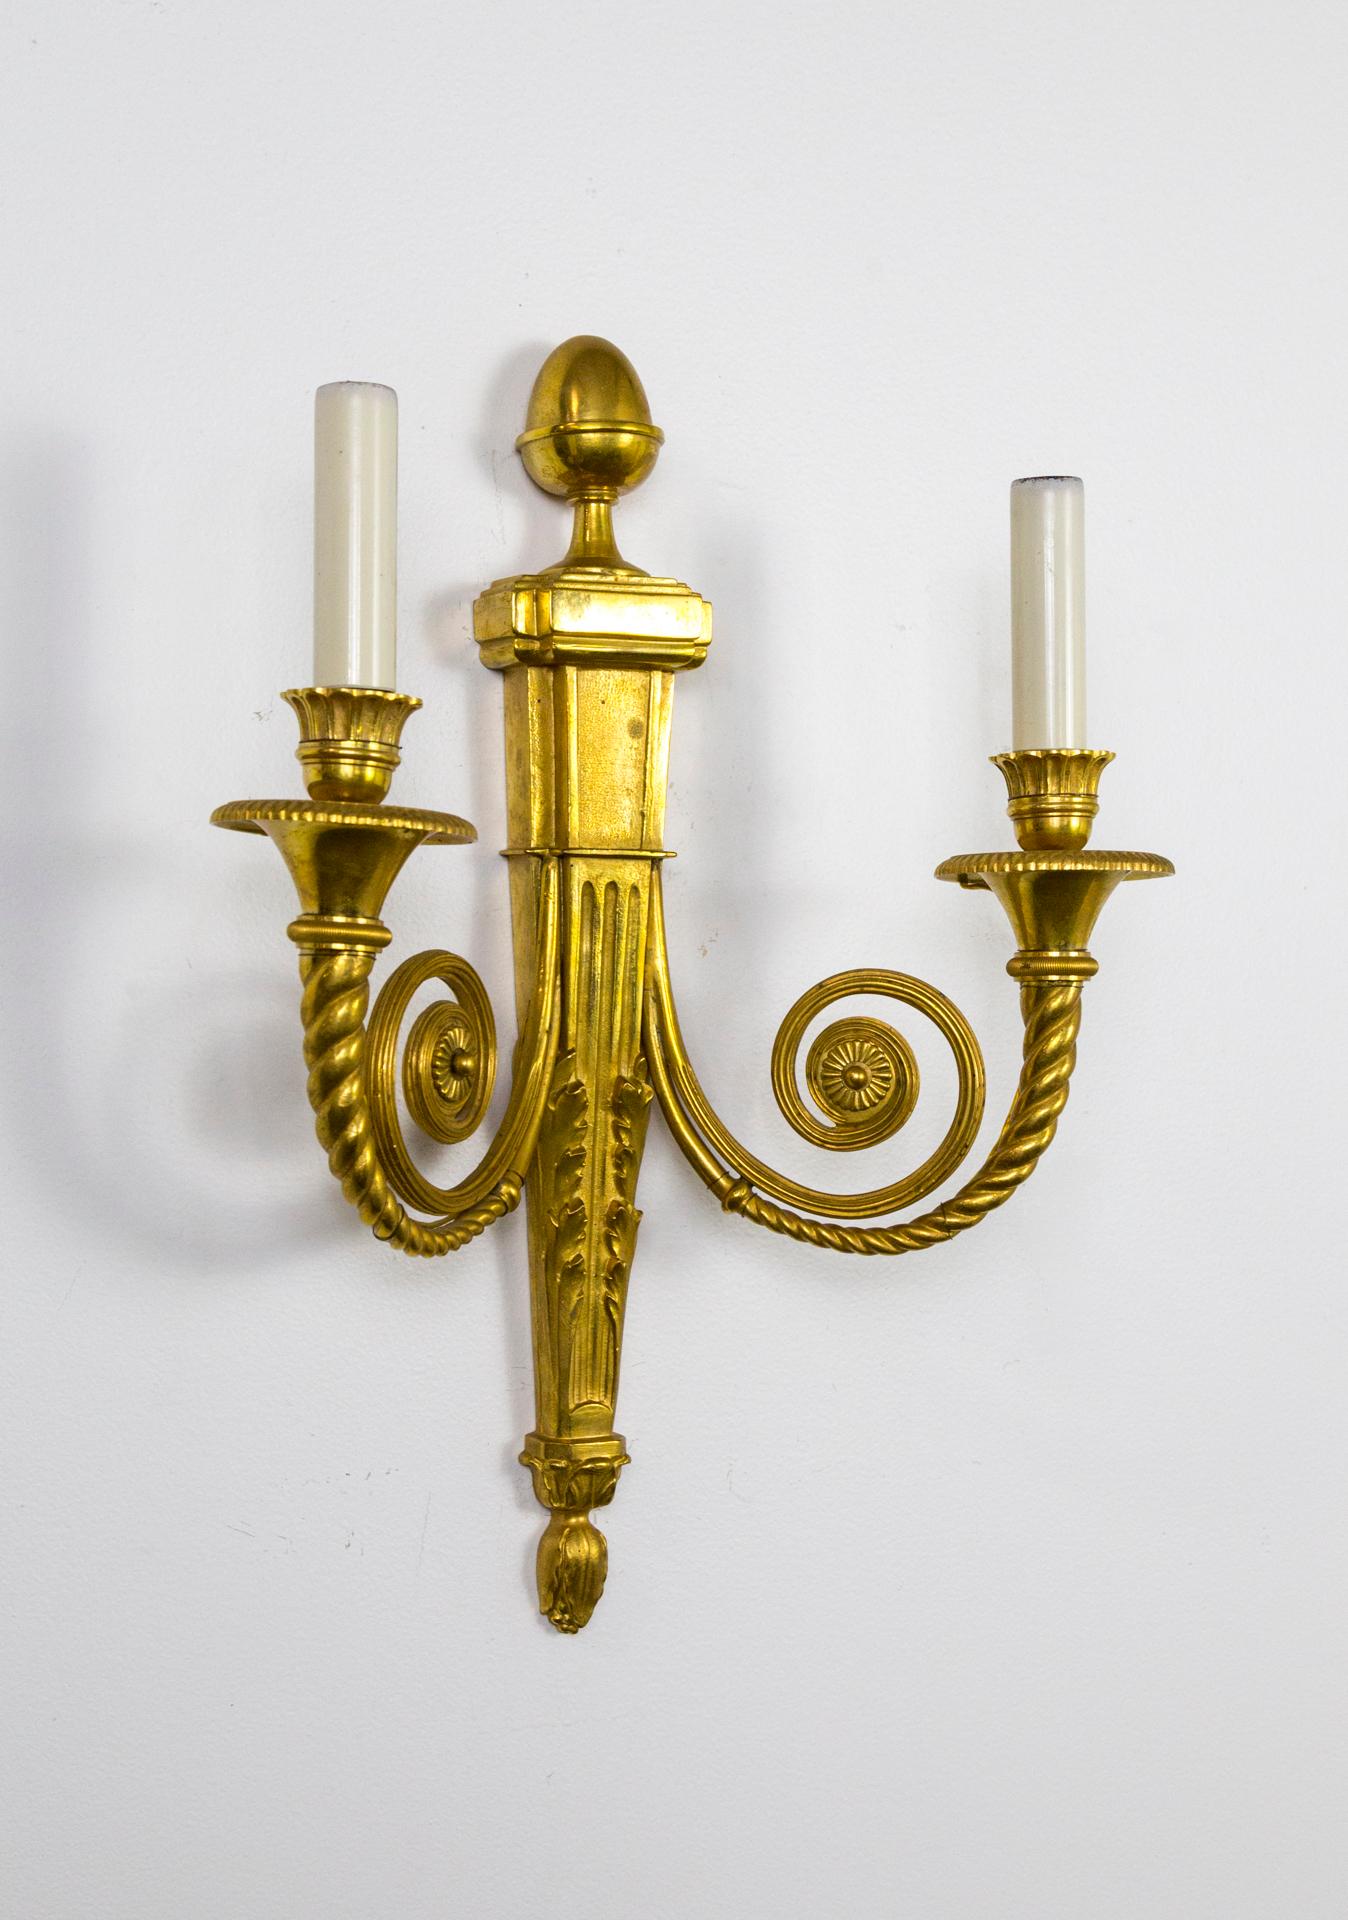 A gorgeously proportioned pair of neoclassical, gilded bronze 2-arm sconces; with acanthus leaf, acorn, swirl, and rosette detailing. Late Belle Époque style, France. Early 1900s. Measures: 18” height x 14” width x 5” depth. Two pair available.